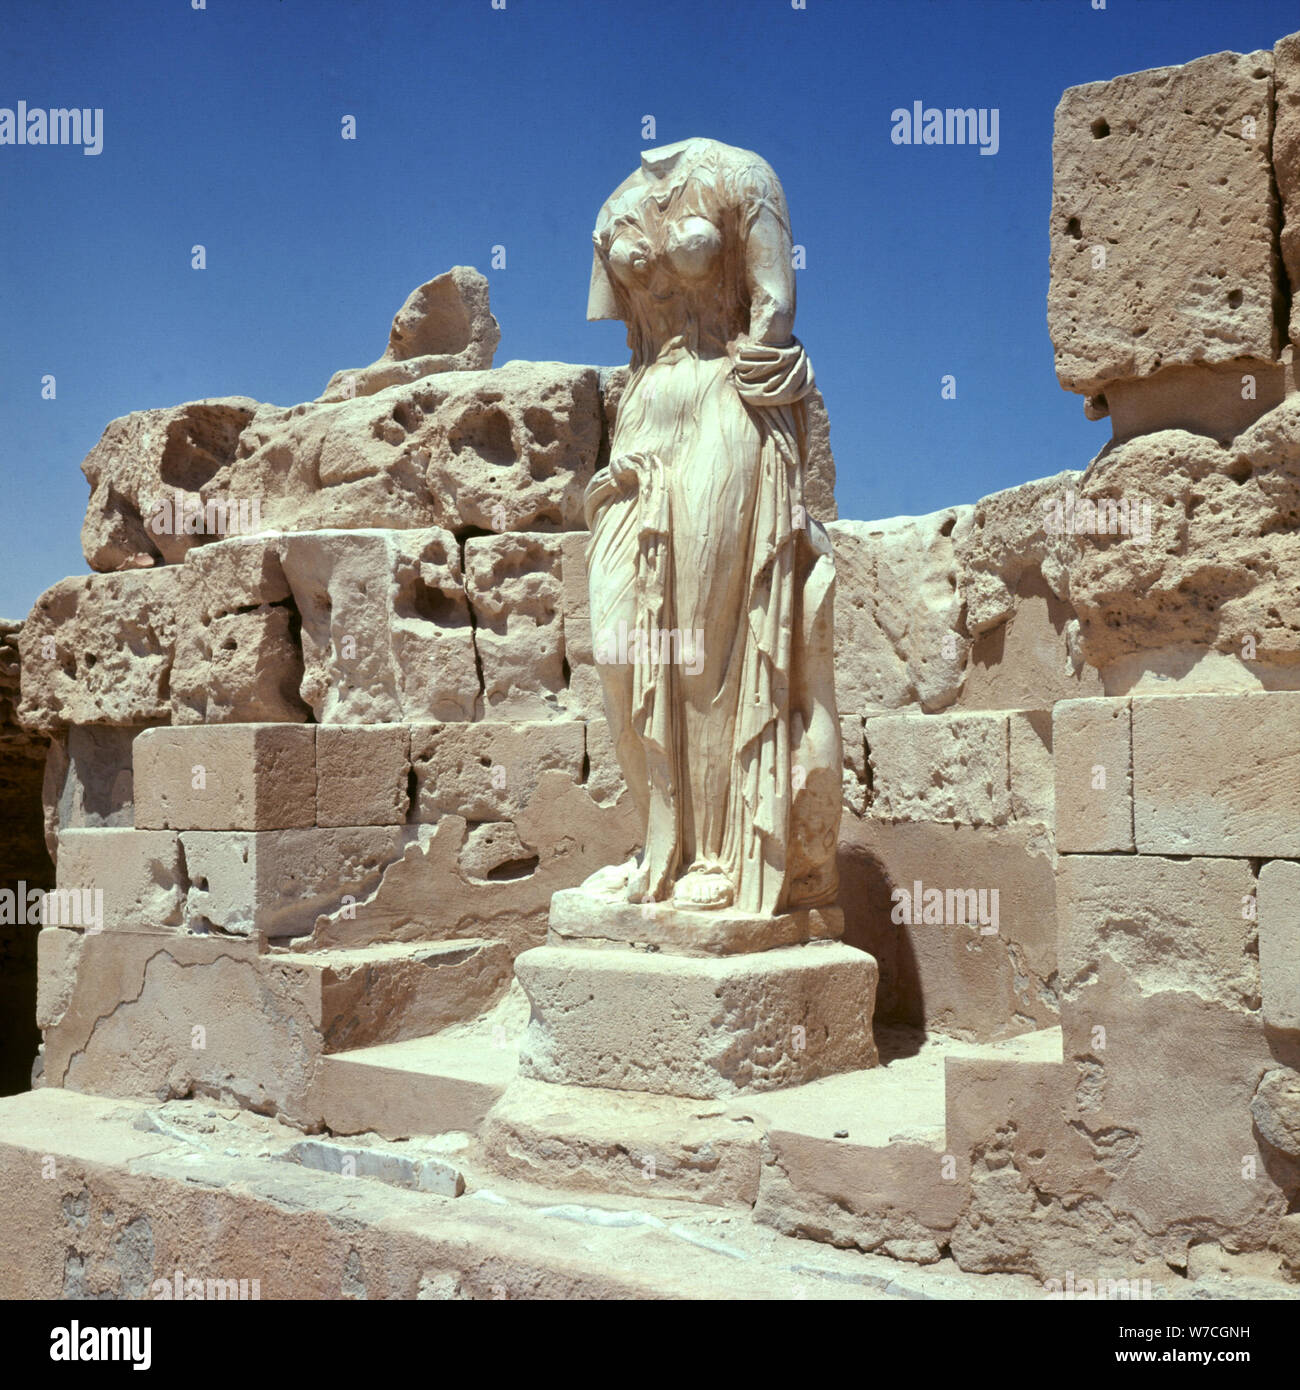 Remains of the ancient Roman city of Sabratha in Libya. Stock Photo